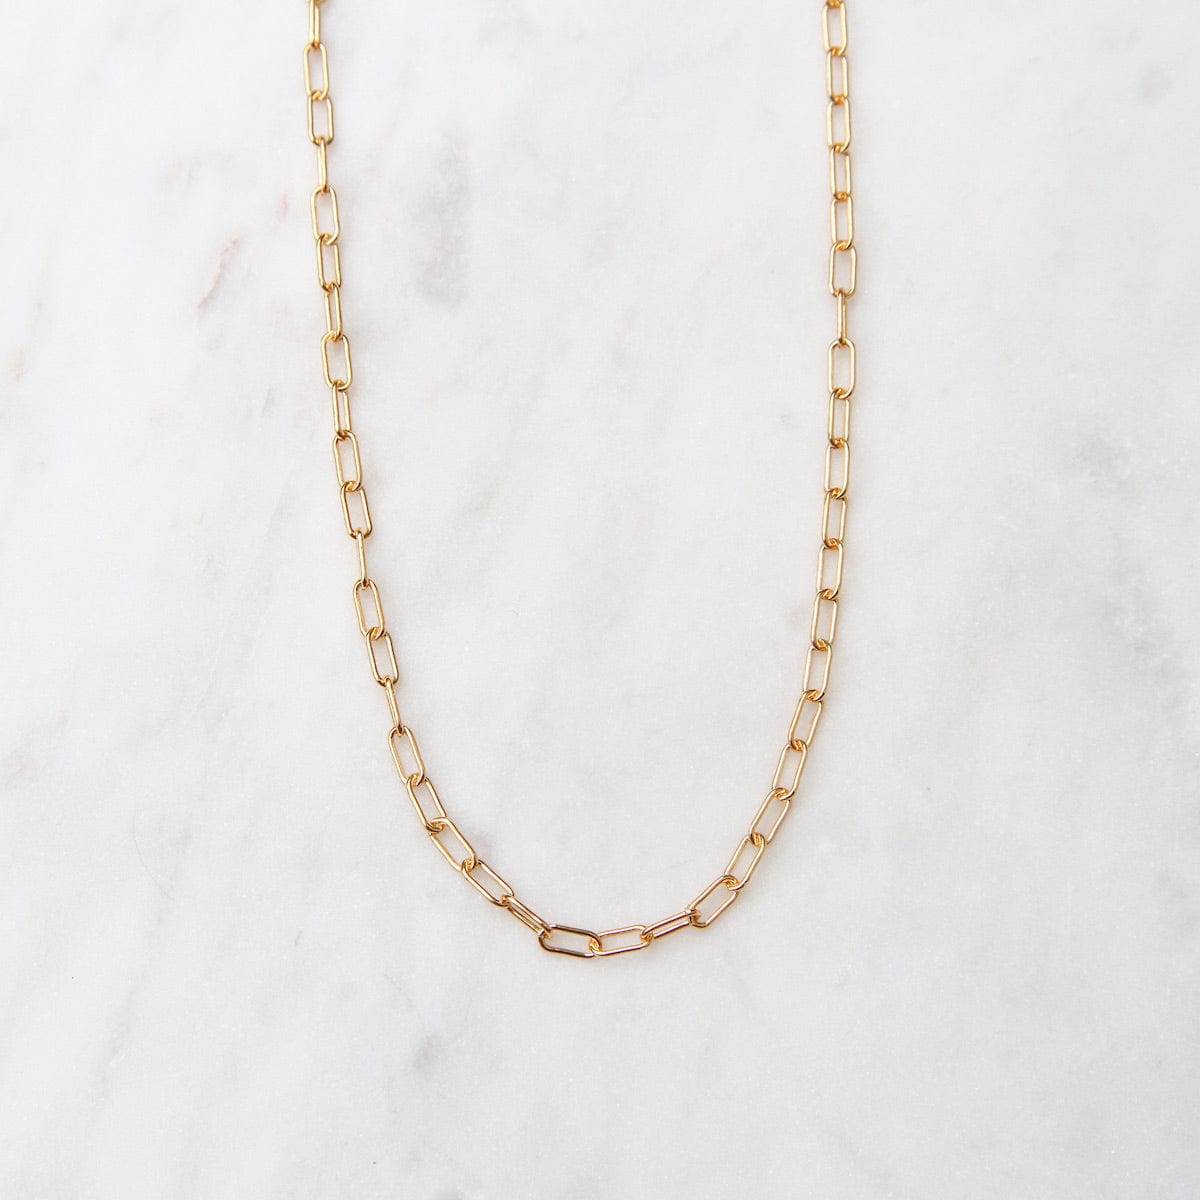 NKL-GF 16" Gold Filled Round Drawn Cable Chain